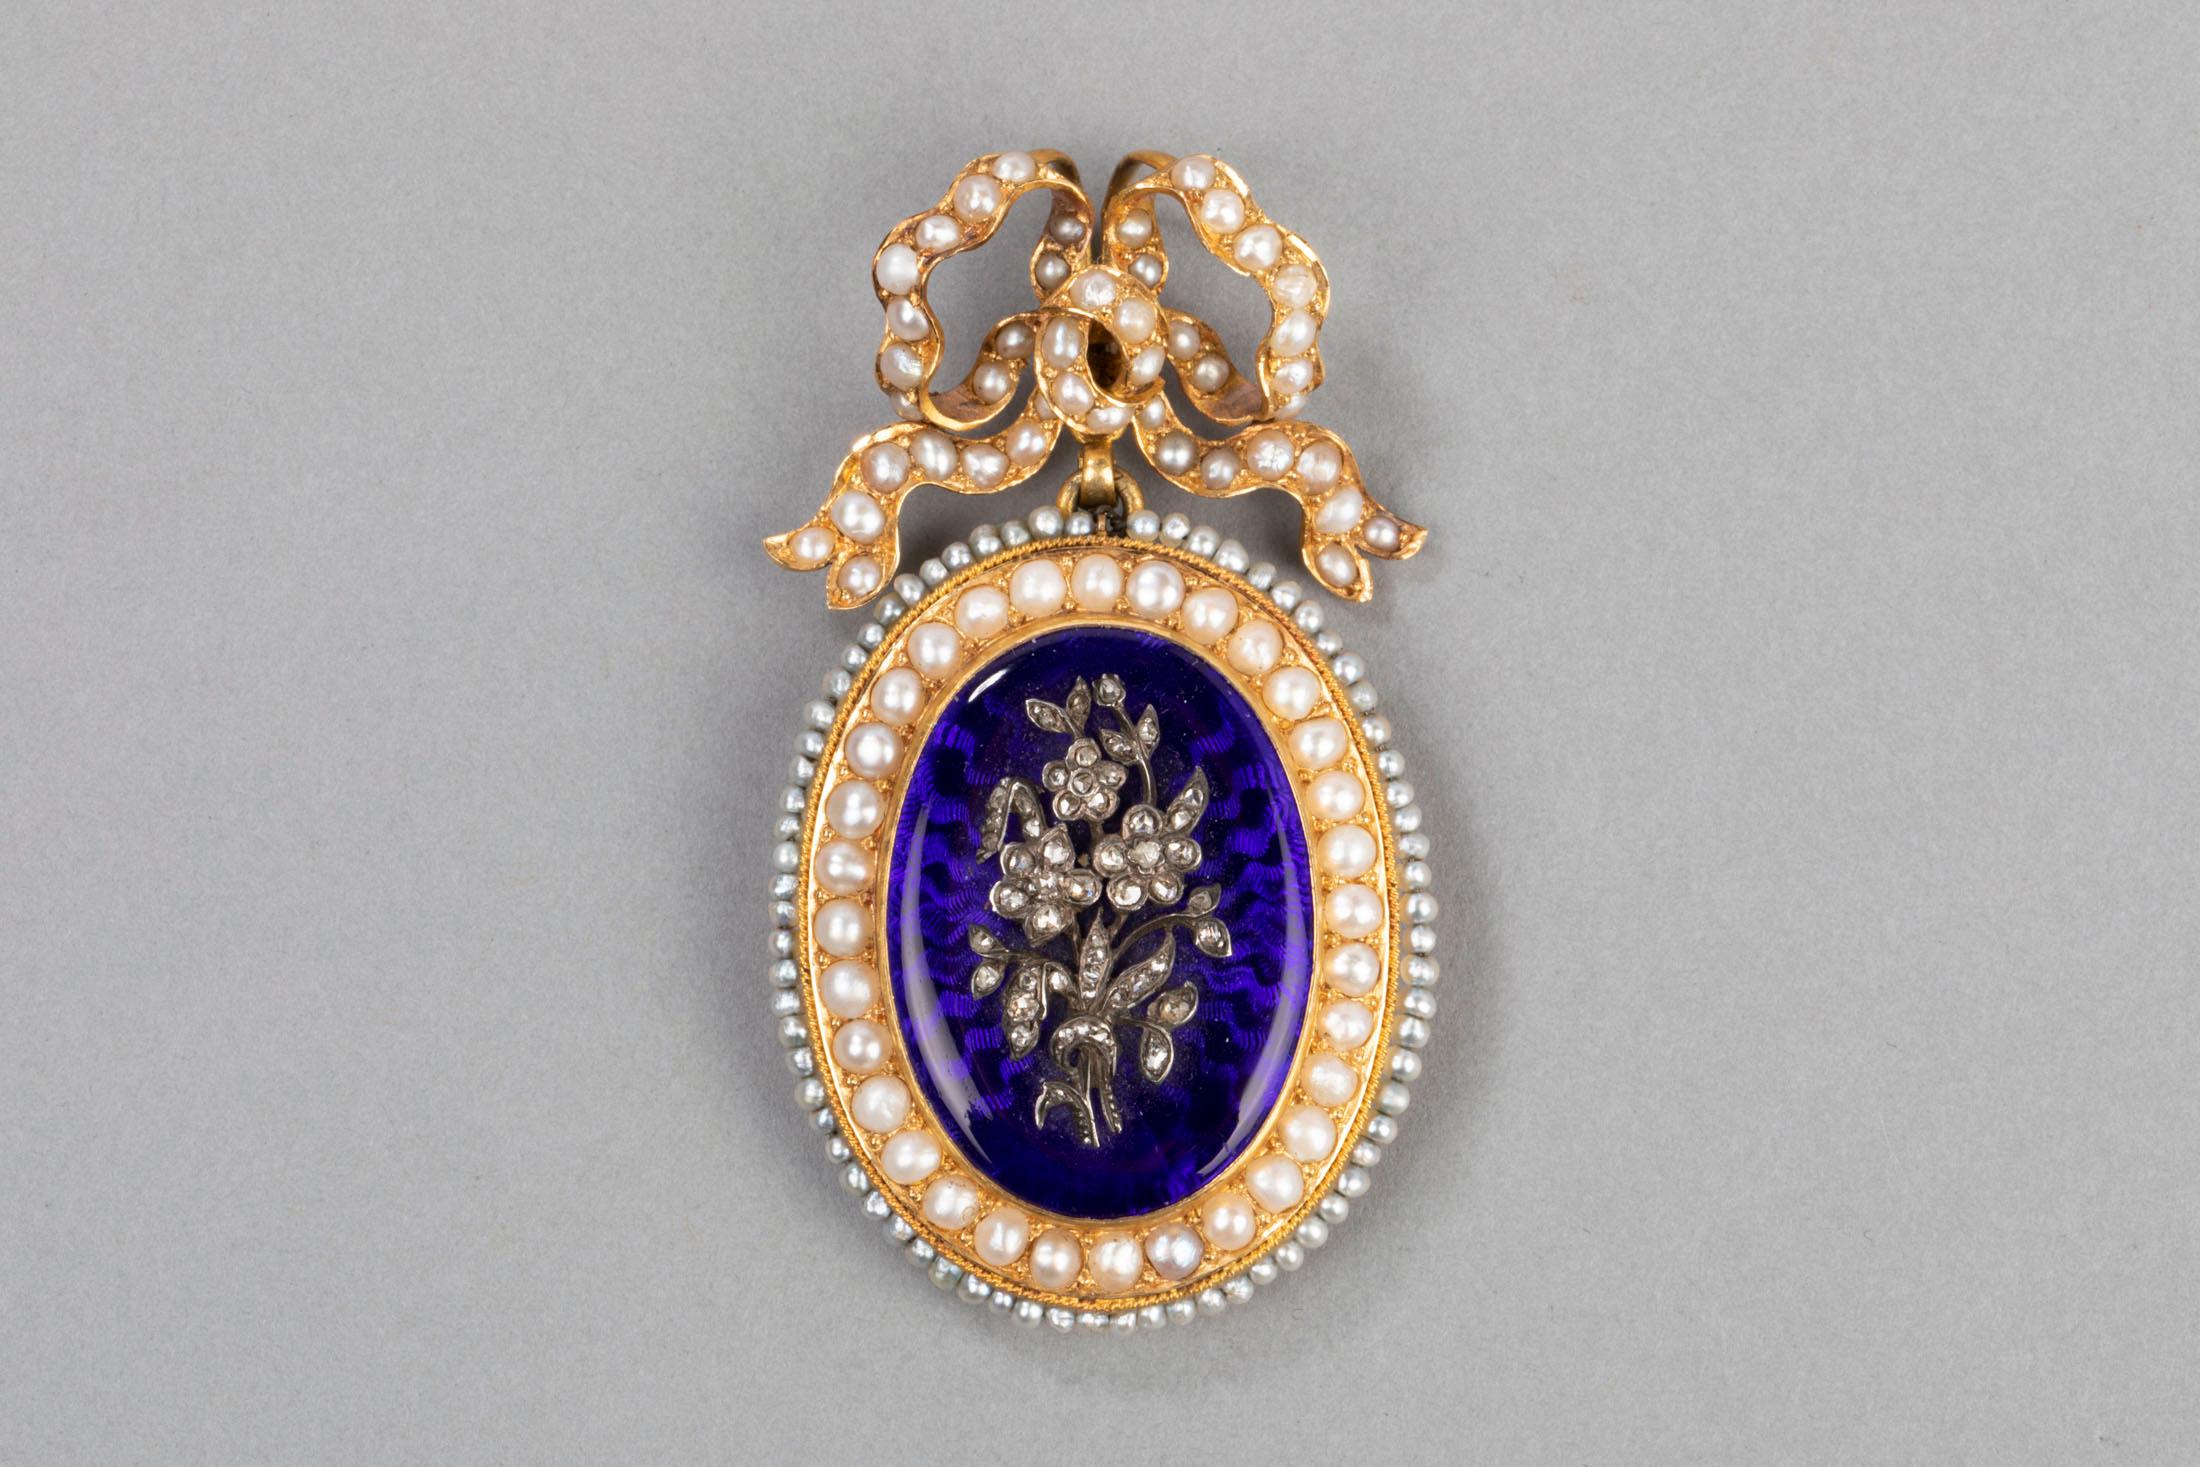 Very Beautiful antique Locket. Made in France circa 1850.   
Mounted in Yellow Gold 750 (French hallmark: eagle, mark of the maker) 
 Covered with blue enamel and Natural pearls. 
 Floral theme with rose cut diamonds.  
 Dimensions: 6.5 * 4 cm 